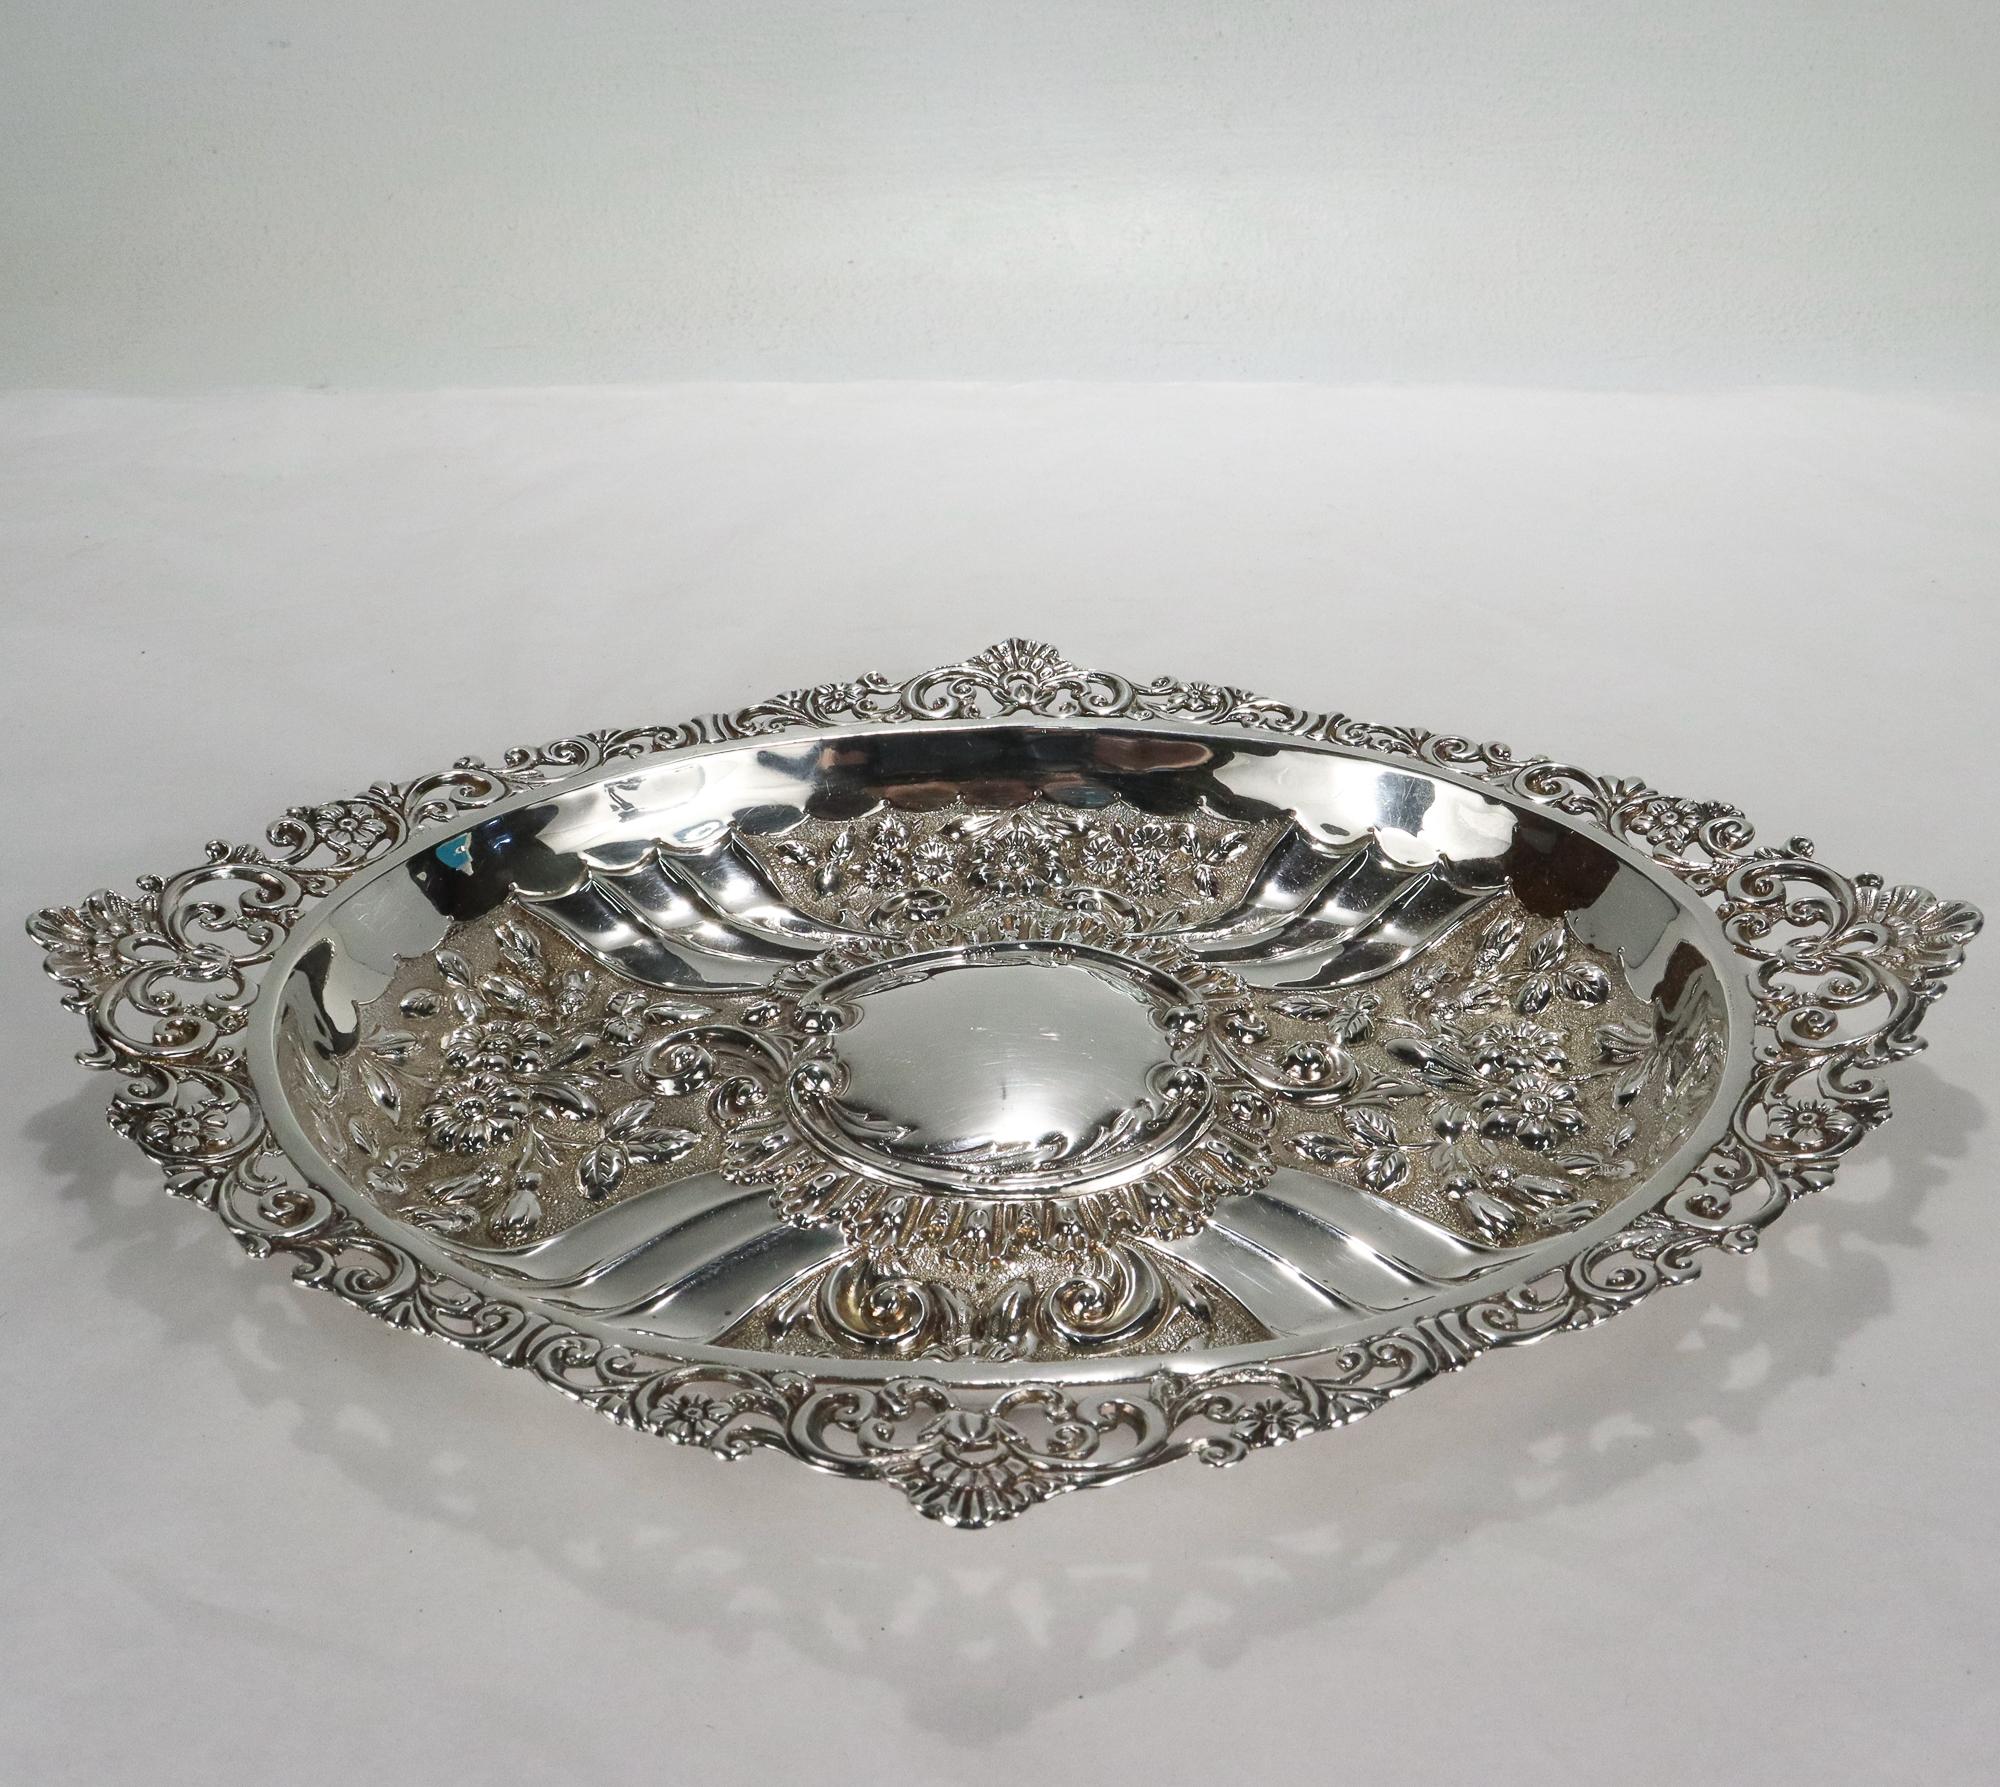 Antique Mappin & Webb Ornate Reticulated Repousse Sterling Silver Dresser Tray In Good Condition For Sale In Philadelphia, PA